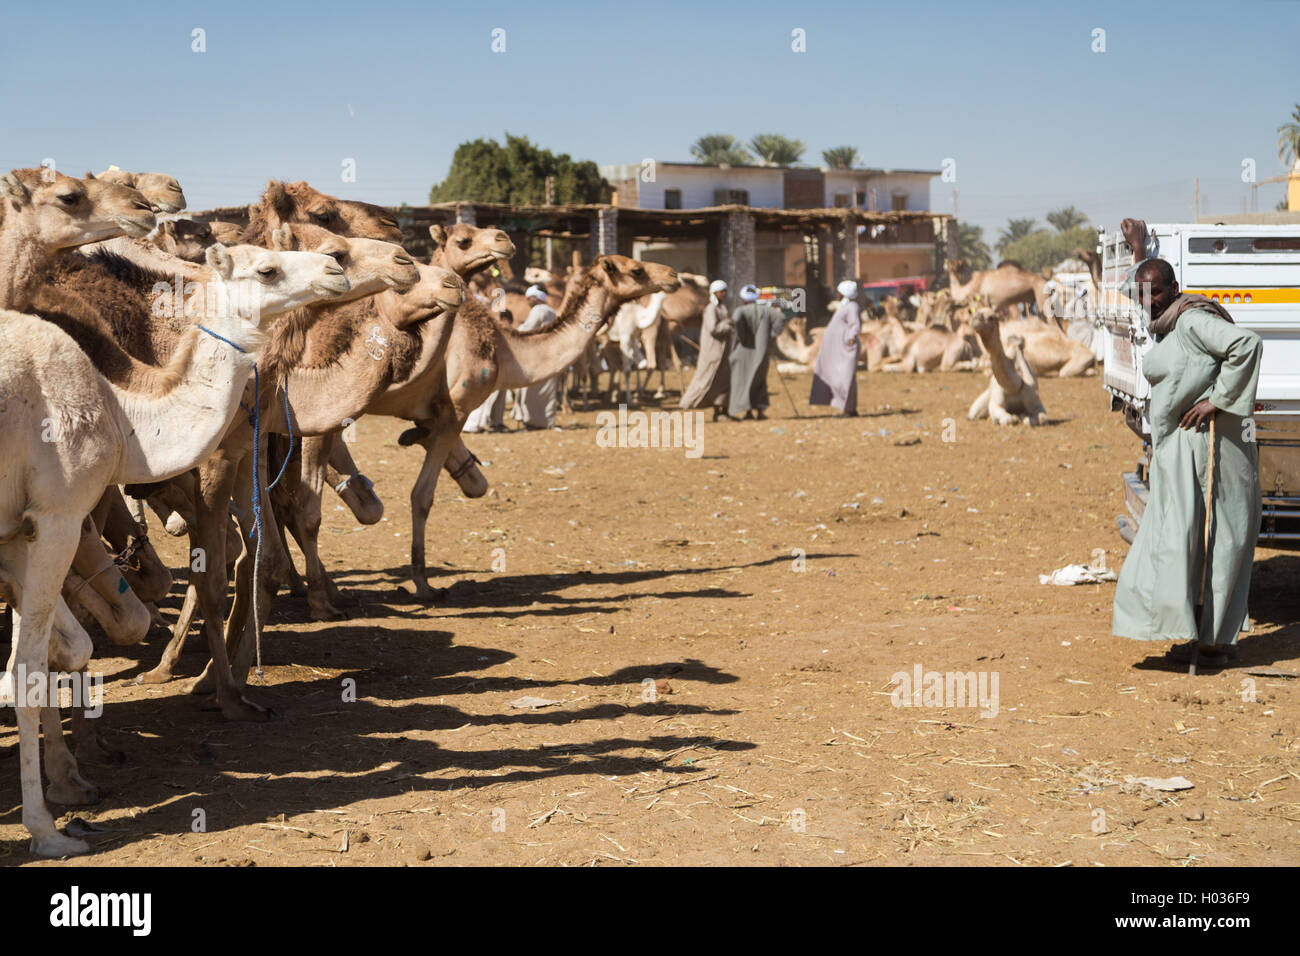 DARAW, EGYPT - FEBRUARY 6, 2016: Local camel salesman standing by pick up truck at Camel market. Stock Photo